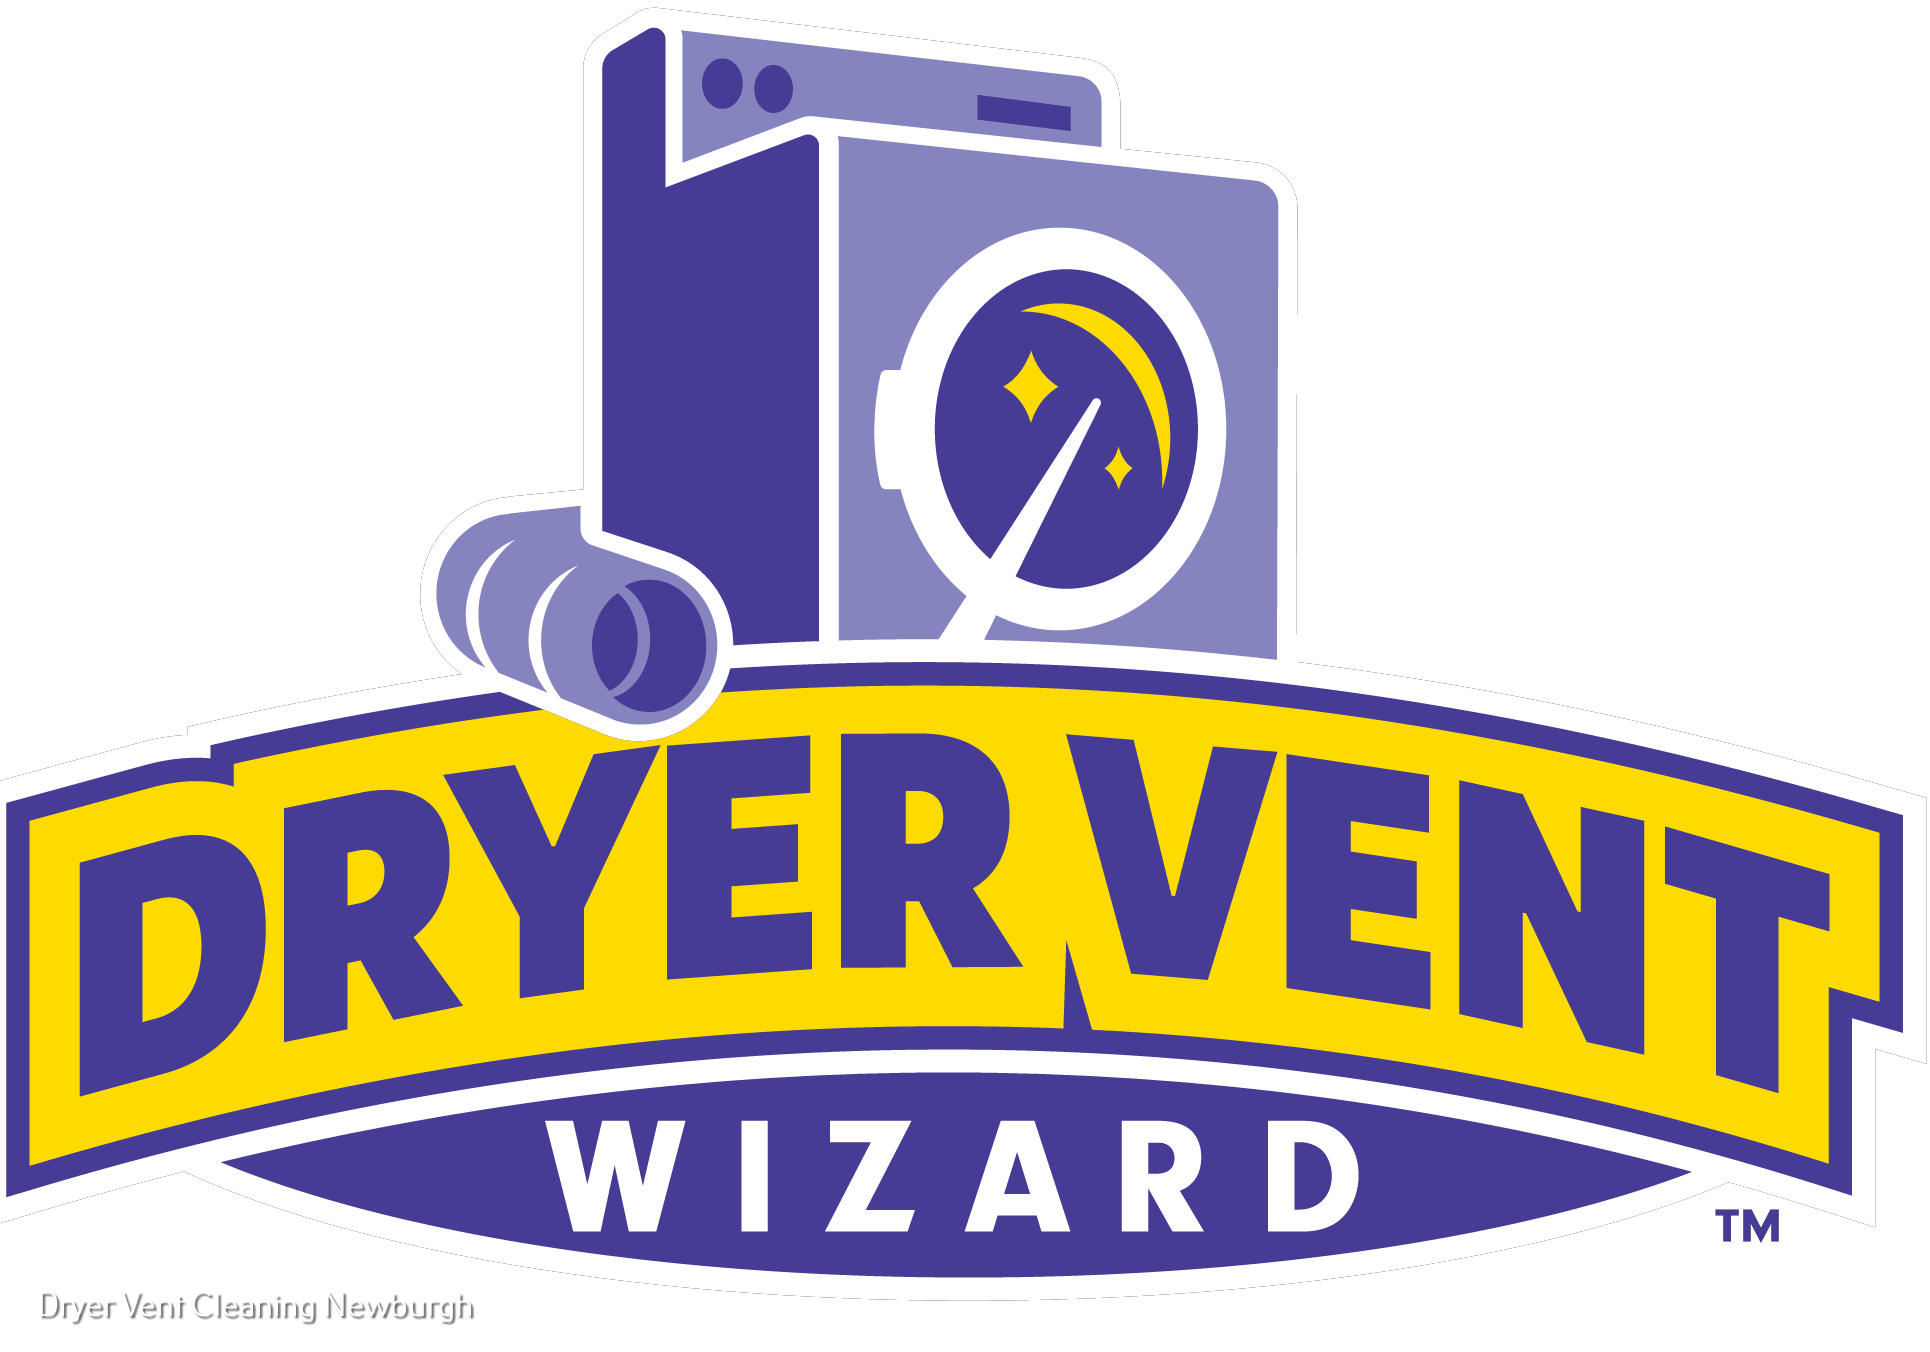 Dryer Vent Wizard of NY Metro Boast as the Go-To Dryer Vent Cleaning Company